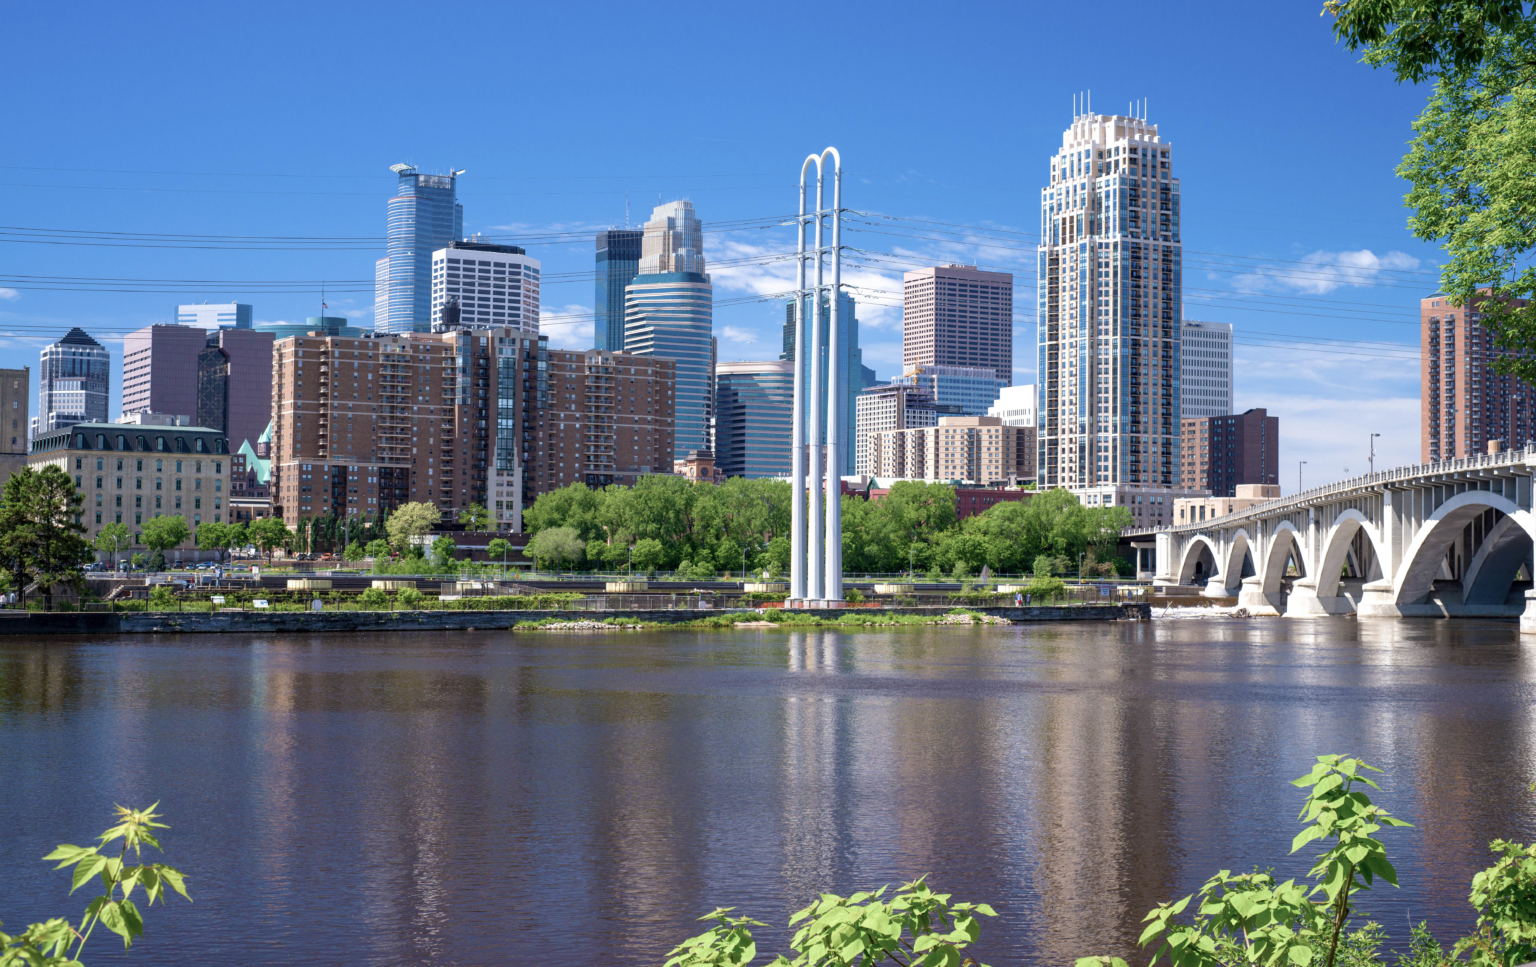 the mississippi river in the foreground of the downtown minneapolis skyline